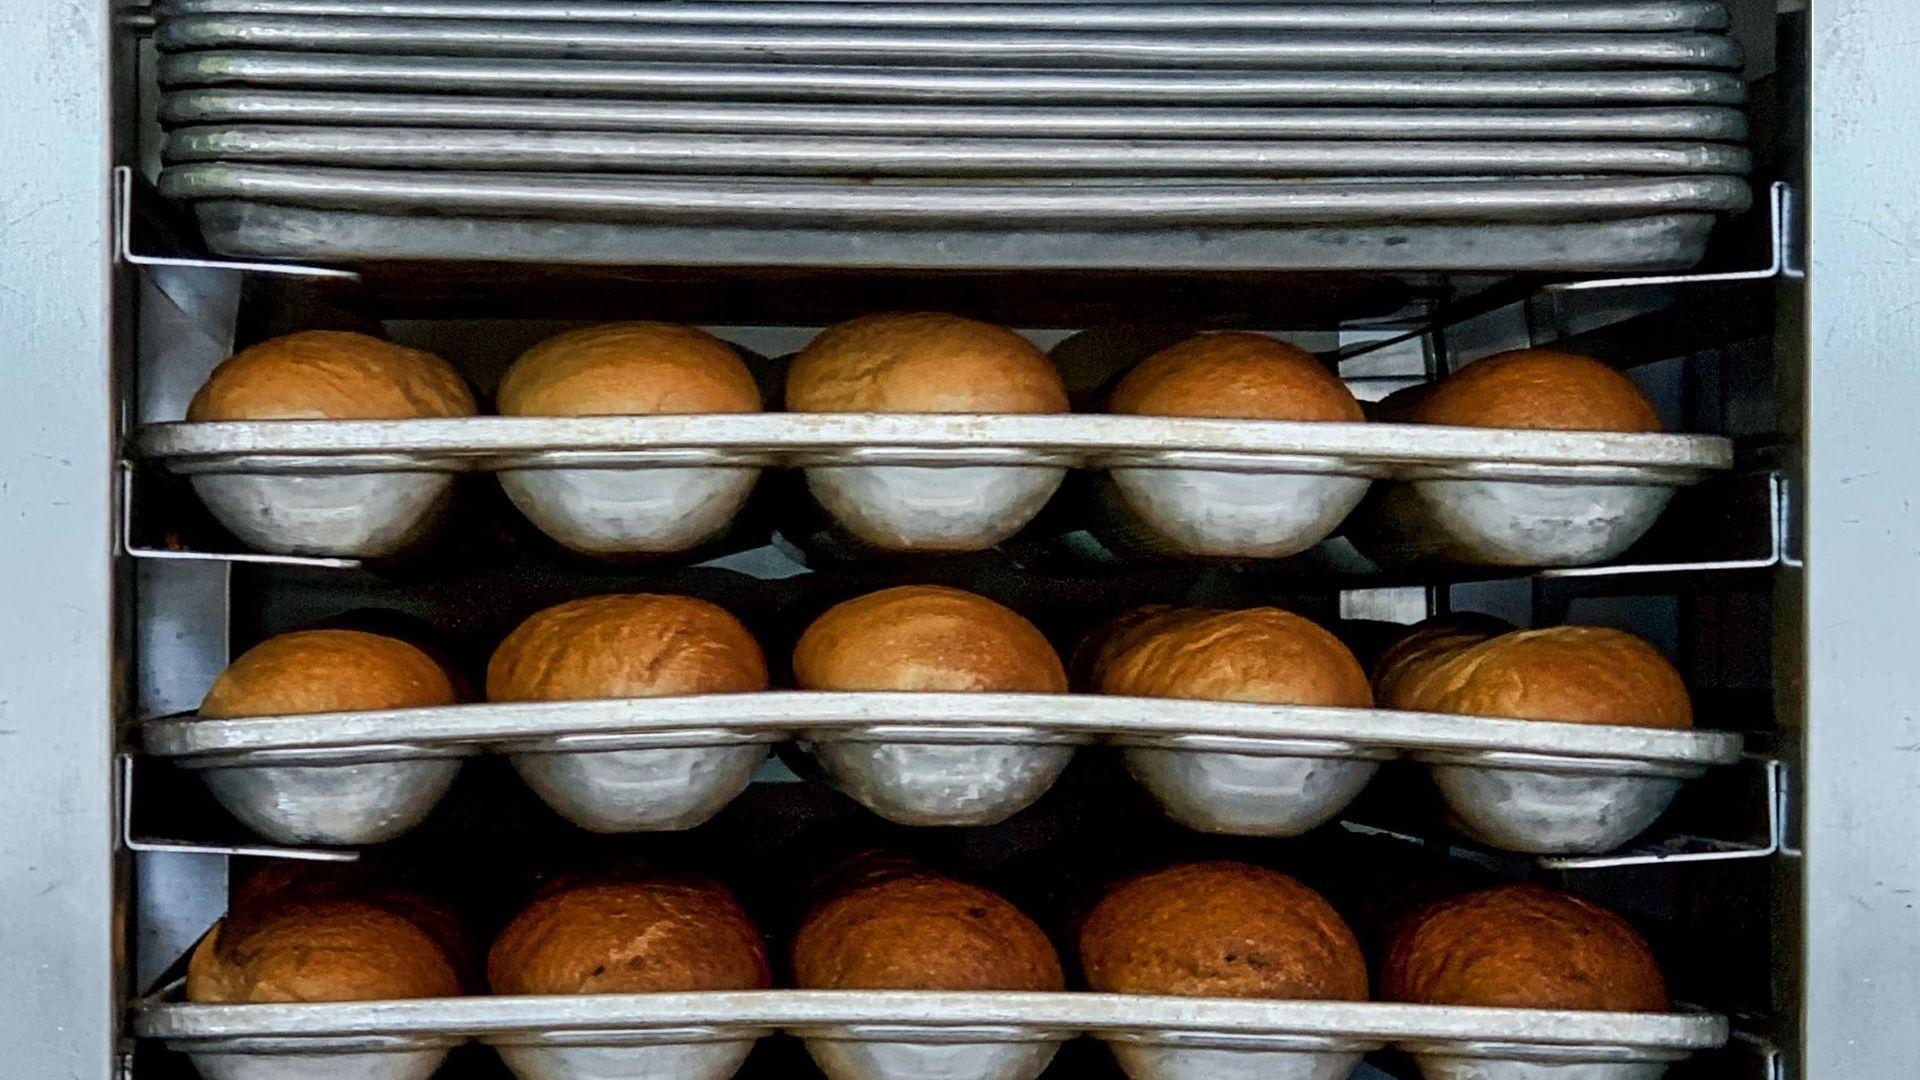 Rows of bread cooking in a commercial oven.